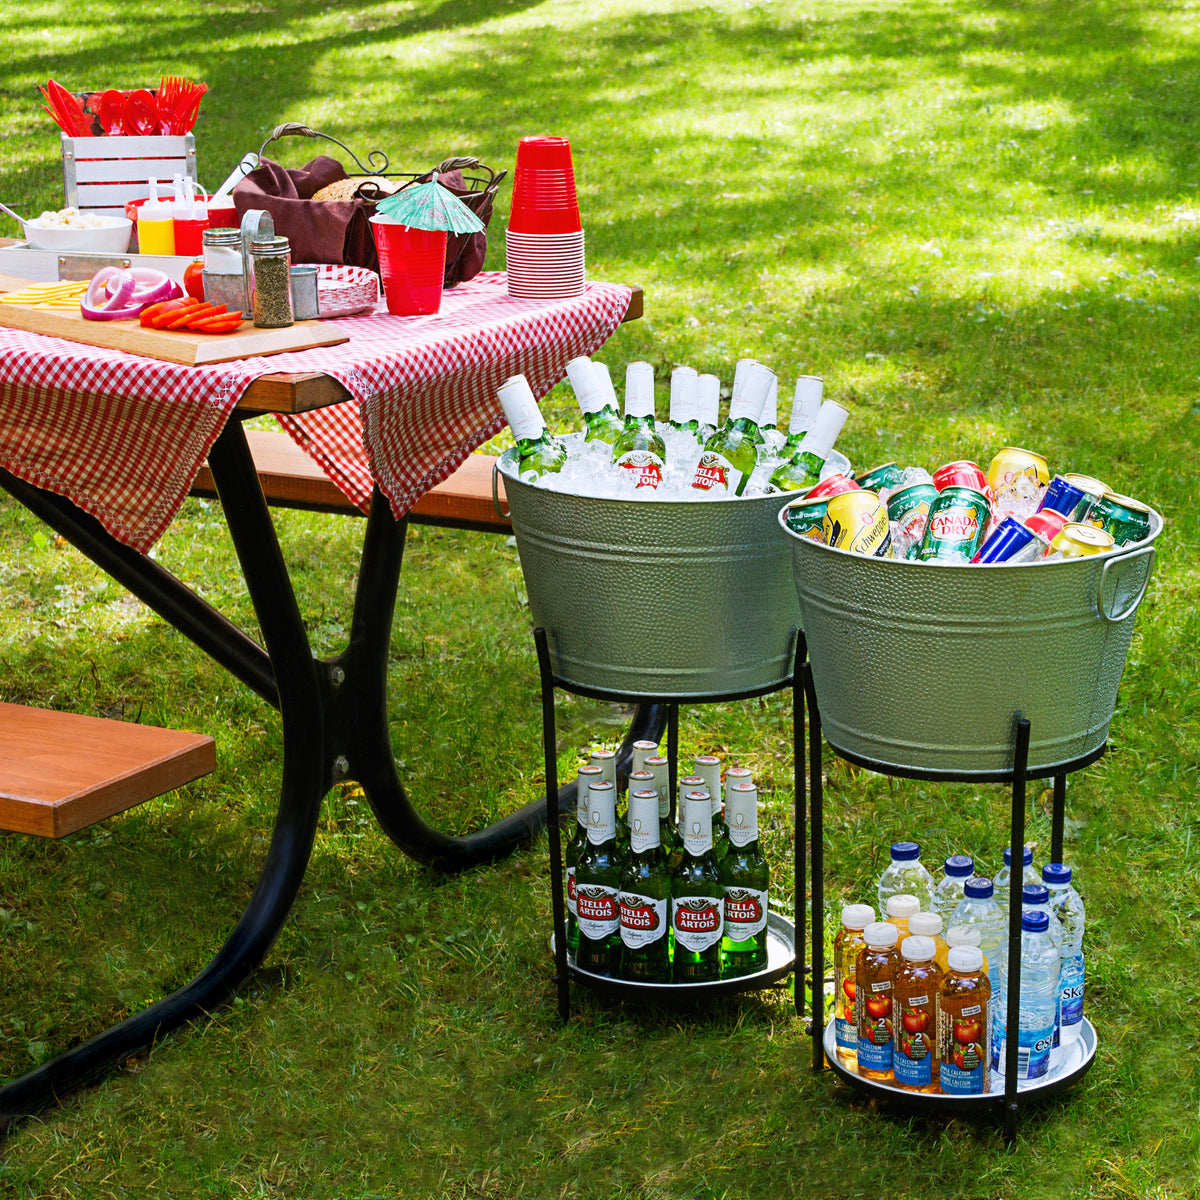 Beverage Tub by Saratoga Home at a party or picnic